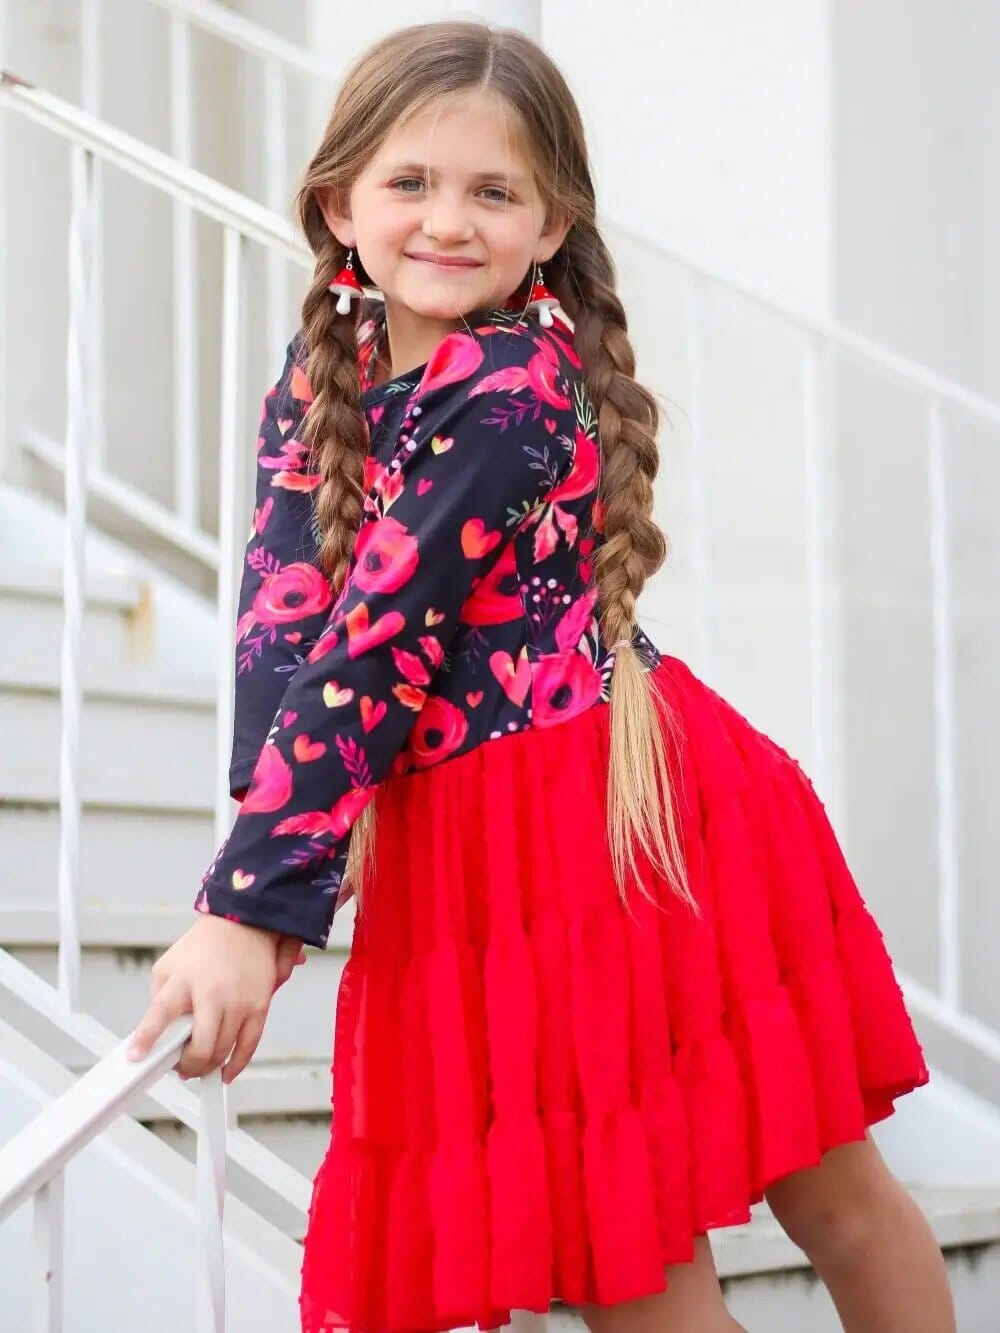 Girls Dresses & Skirt Sets for Every Day, Party, or Special Occasion